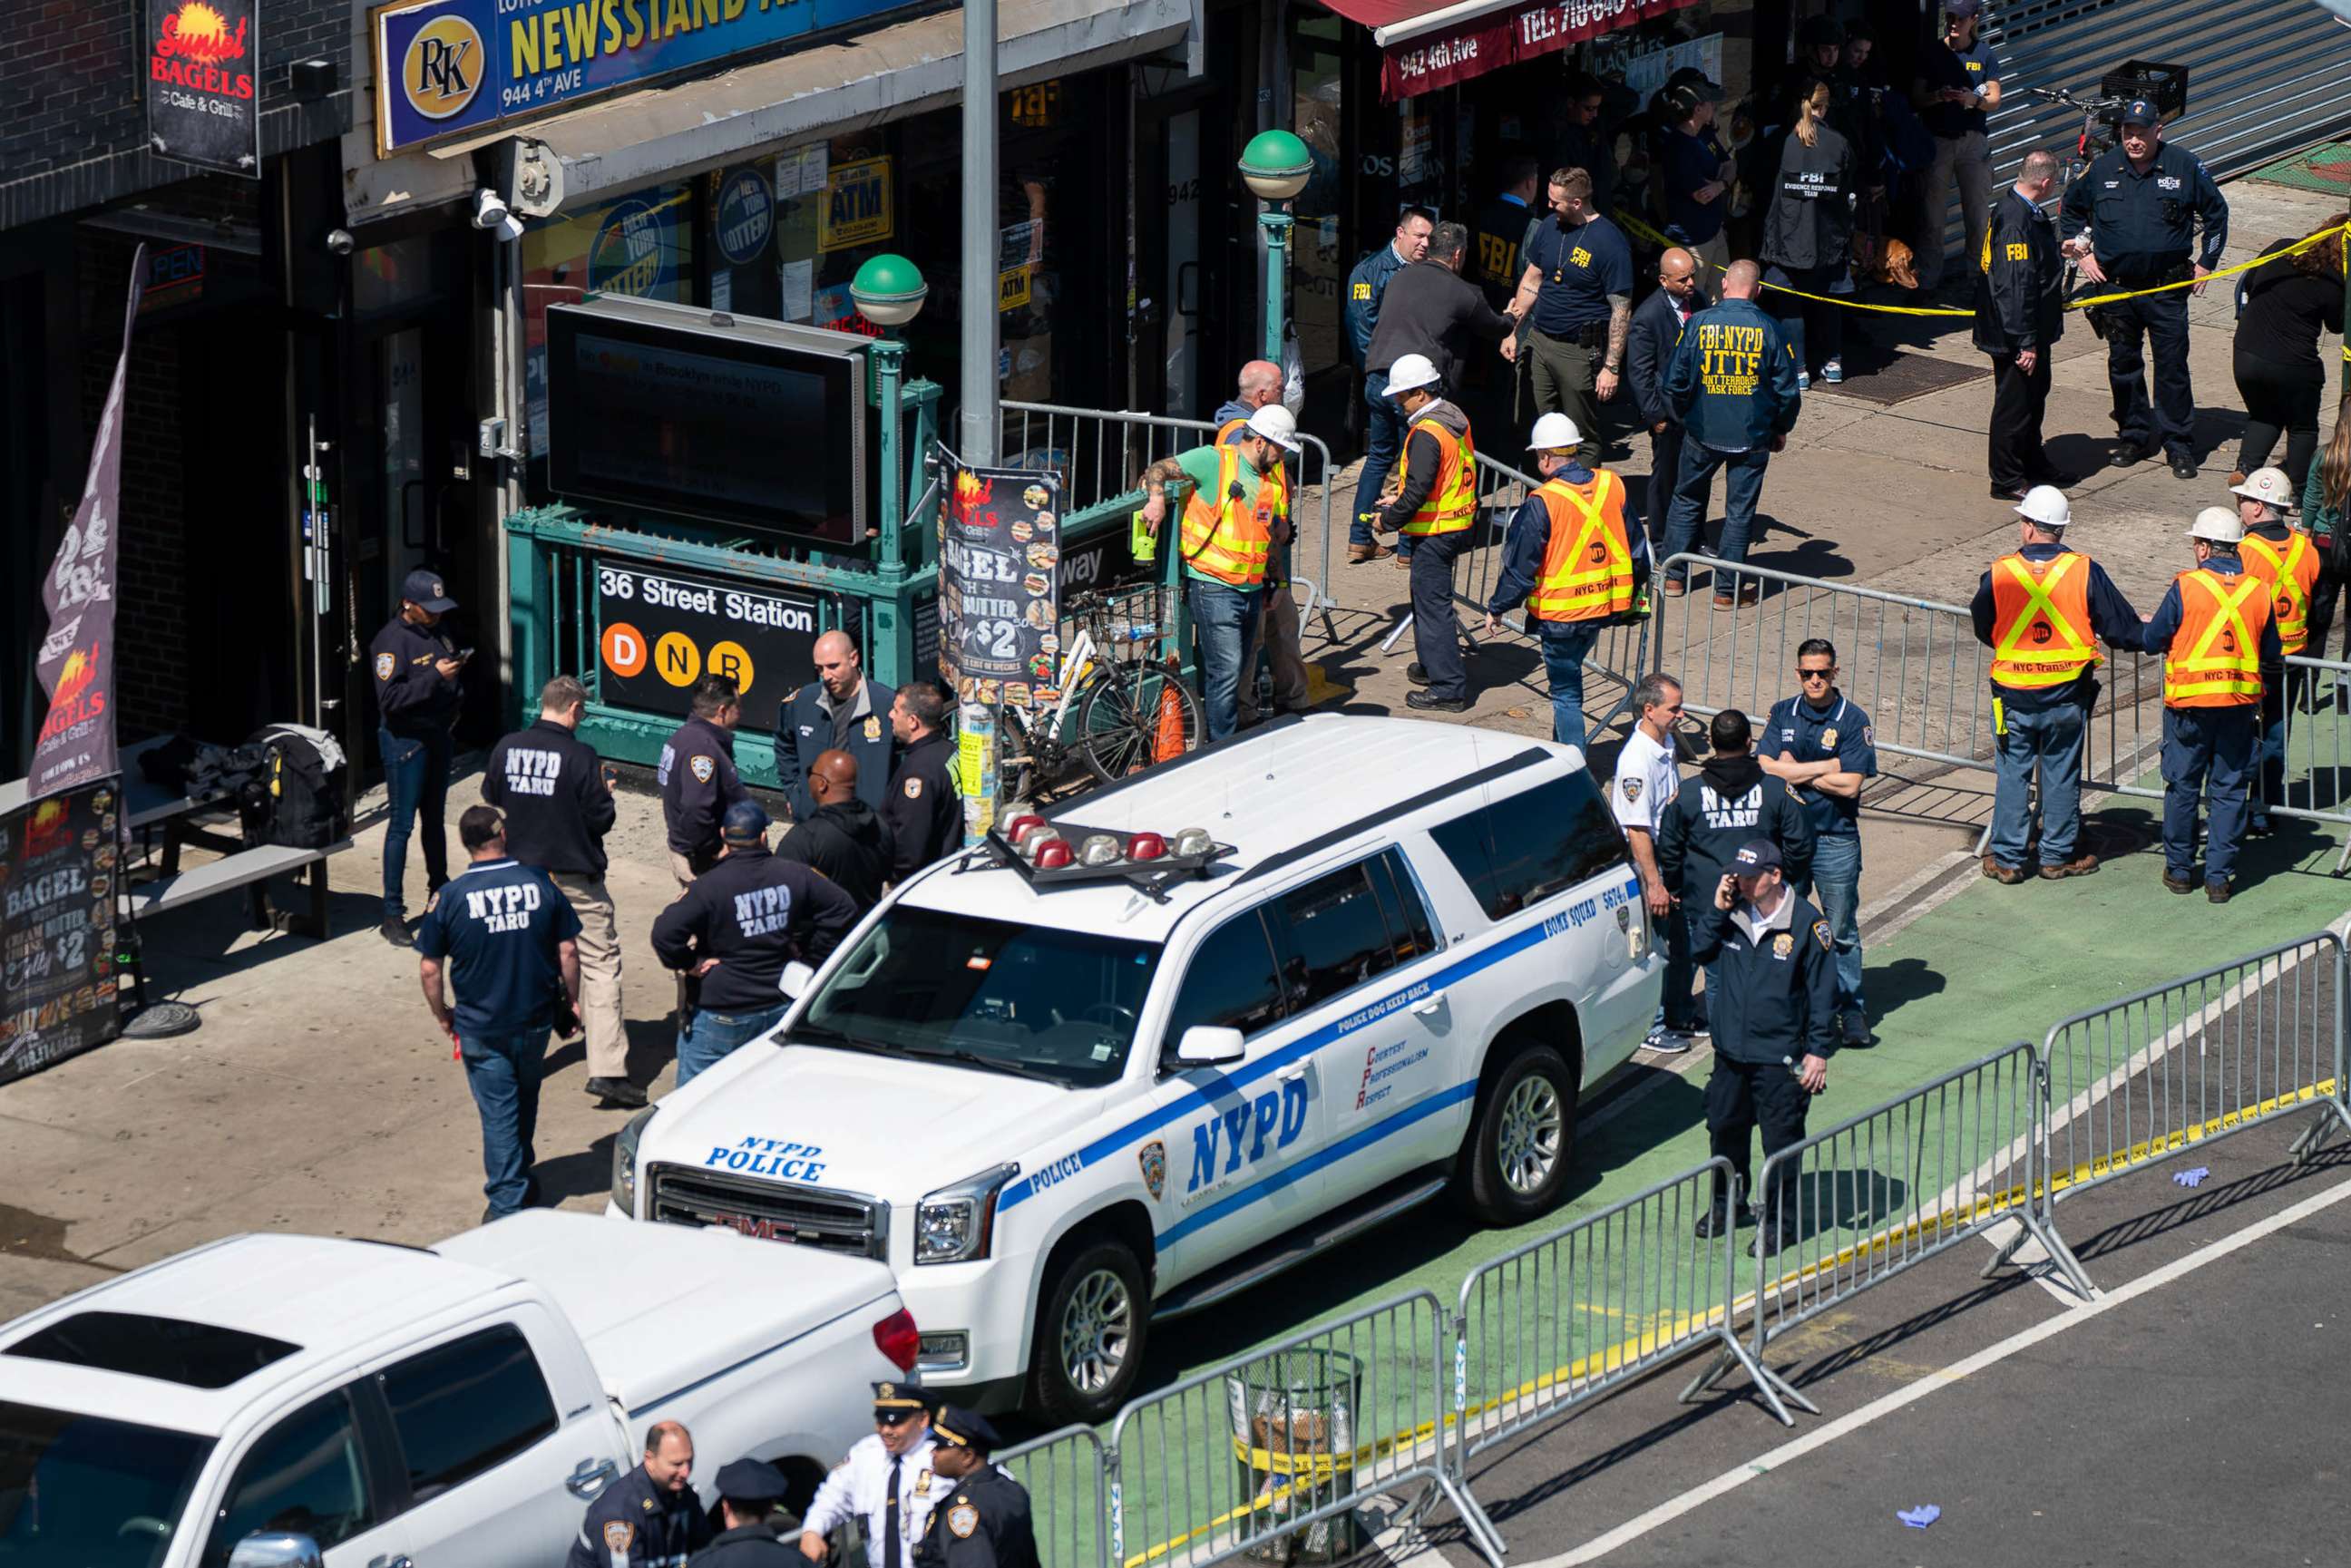 PHOTO: Members of the NYPD gather at the site of a shooting at the 36 St subway station, April 12, 2022 in New York City.